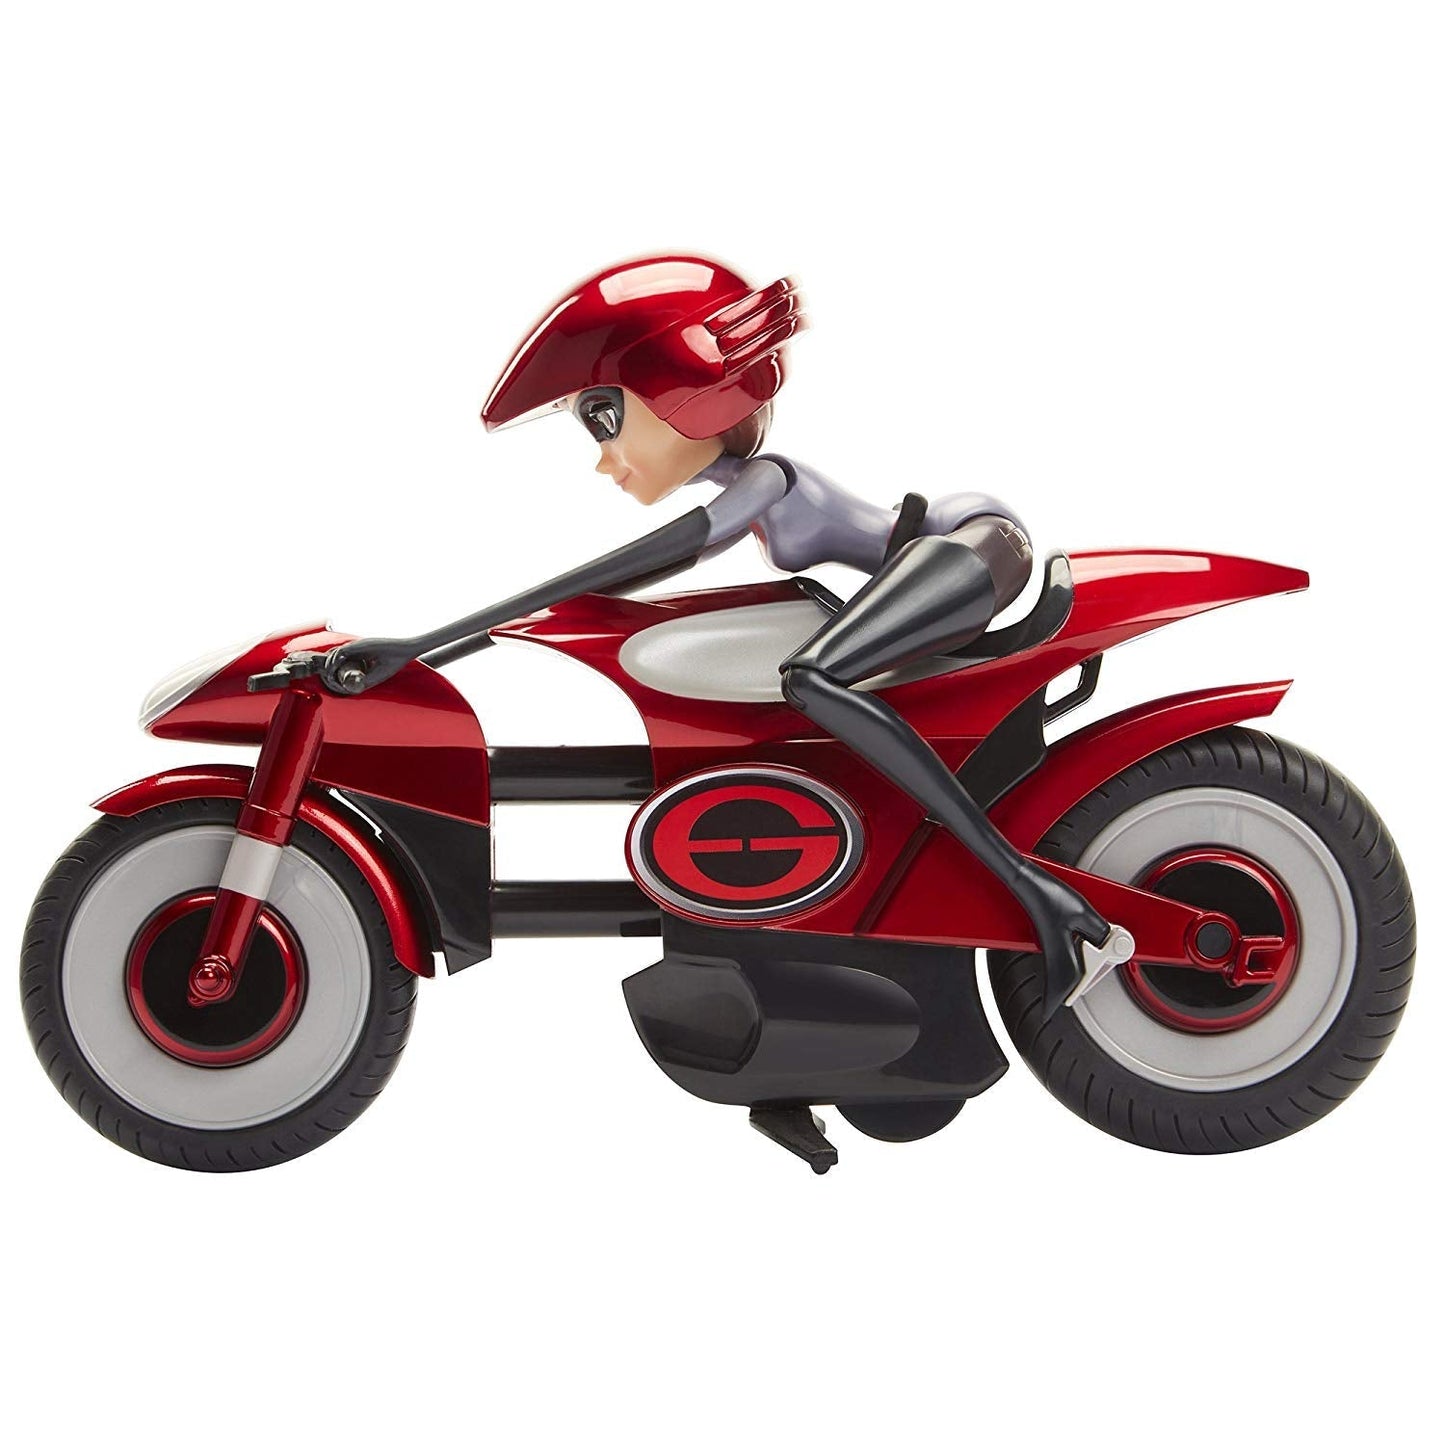 The Incredibles 2 Stretching & Speeding Elasticycle Playset with Removable Elastigirl Figure